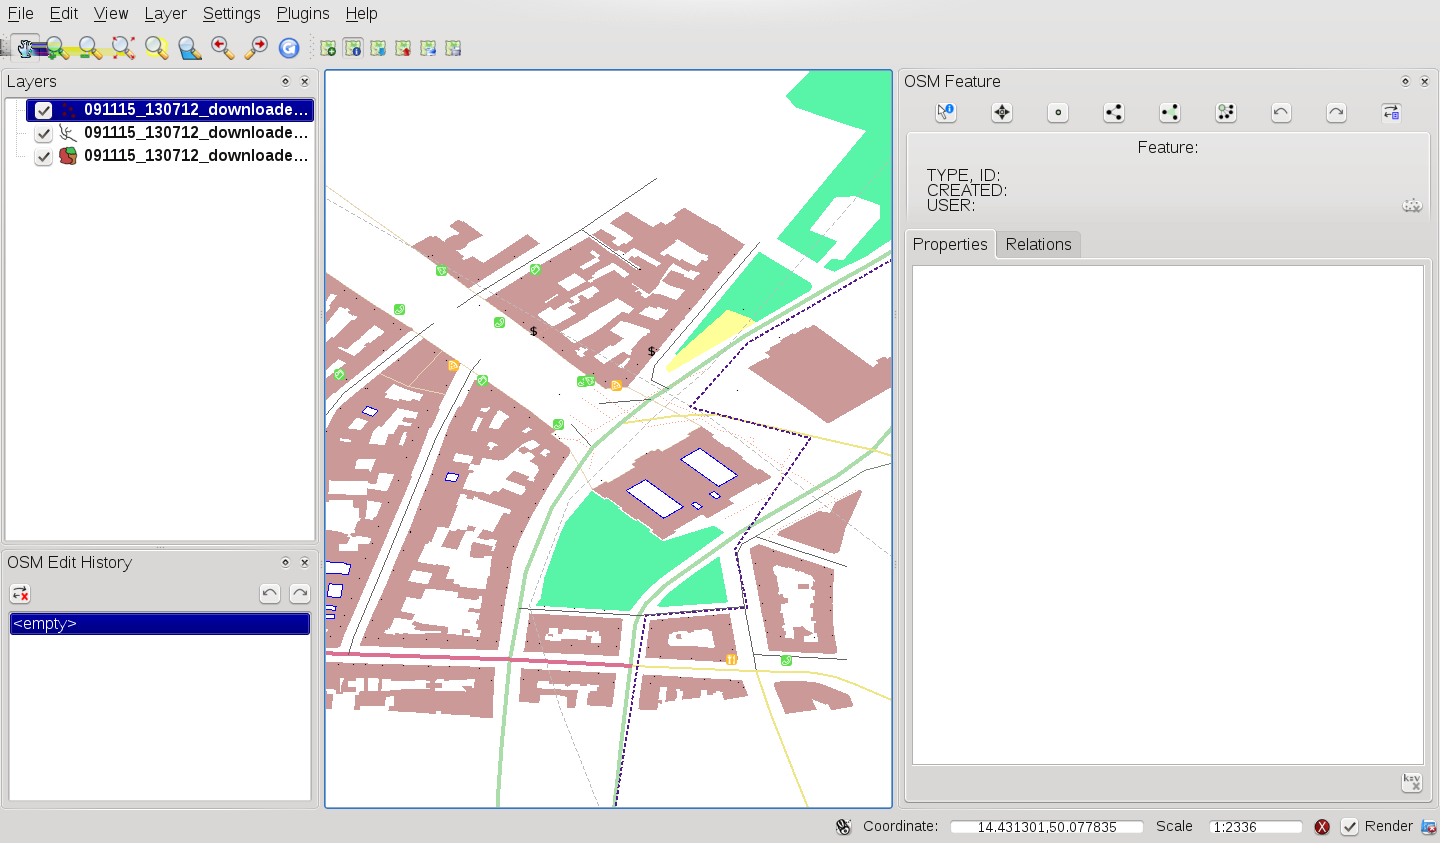 16.3 Installation The OpenStreetMap plugin is a core plugin inside QGIS. The OpenStreetMap plugin can be selected in the Plugin Manager as described in section Activer une extension principale. 16.